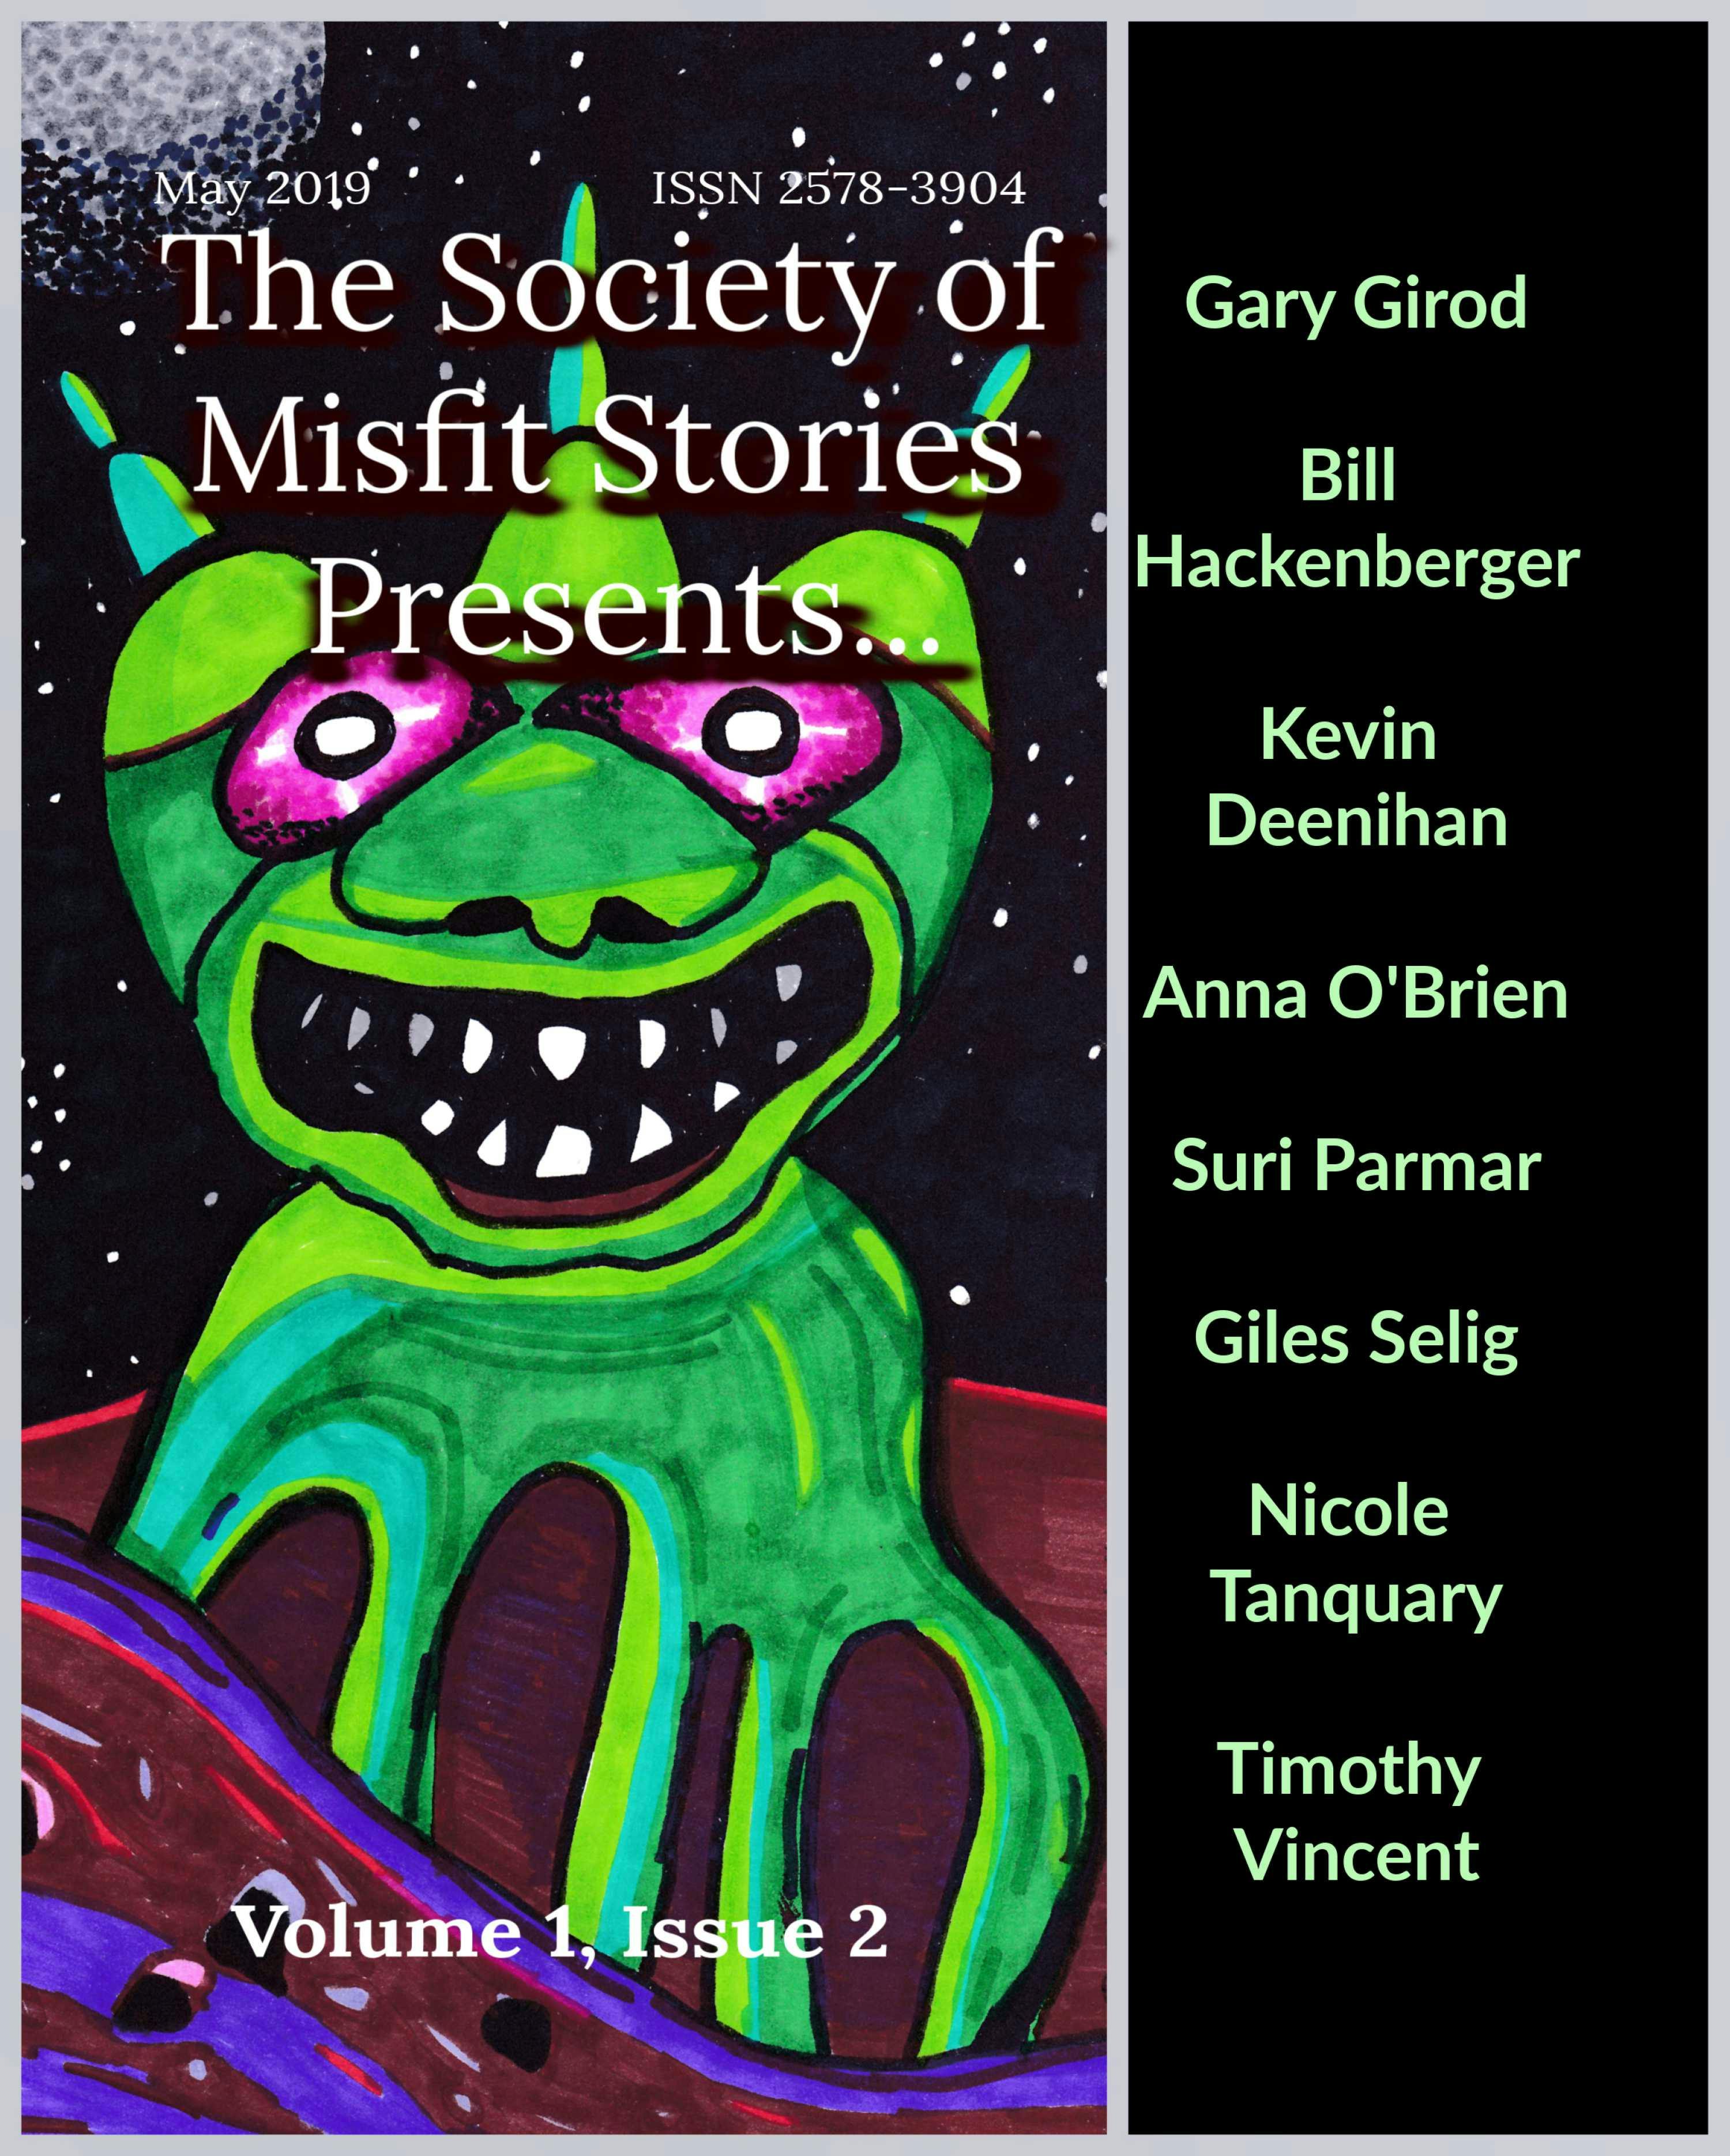 The Society of Misfit Stories Presents...May 2019 - Kevin Deenihan, Suri Parmar, Anna O'Brien, Nicole Tanquary, Giles Selig, Timothy Vincent, Bill Hackenberger, Gary Girod